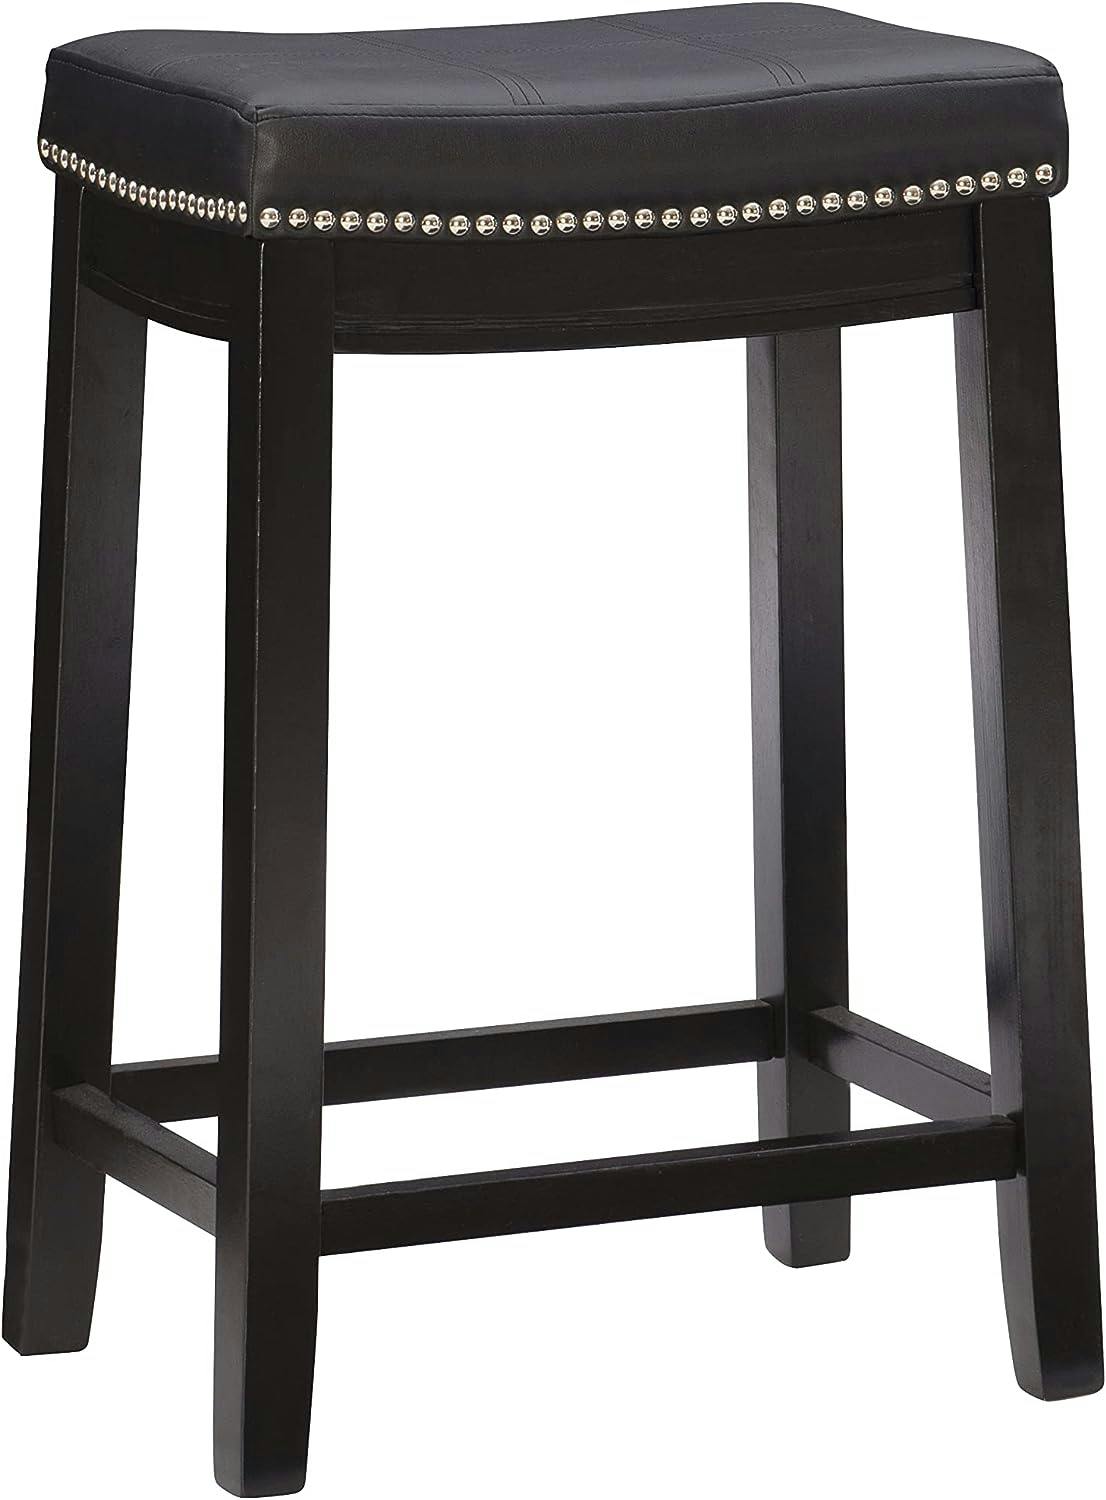 26" Black Wood and Leather Saddle-Style Backless Counter Stool